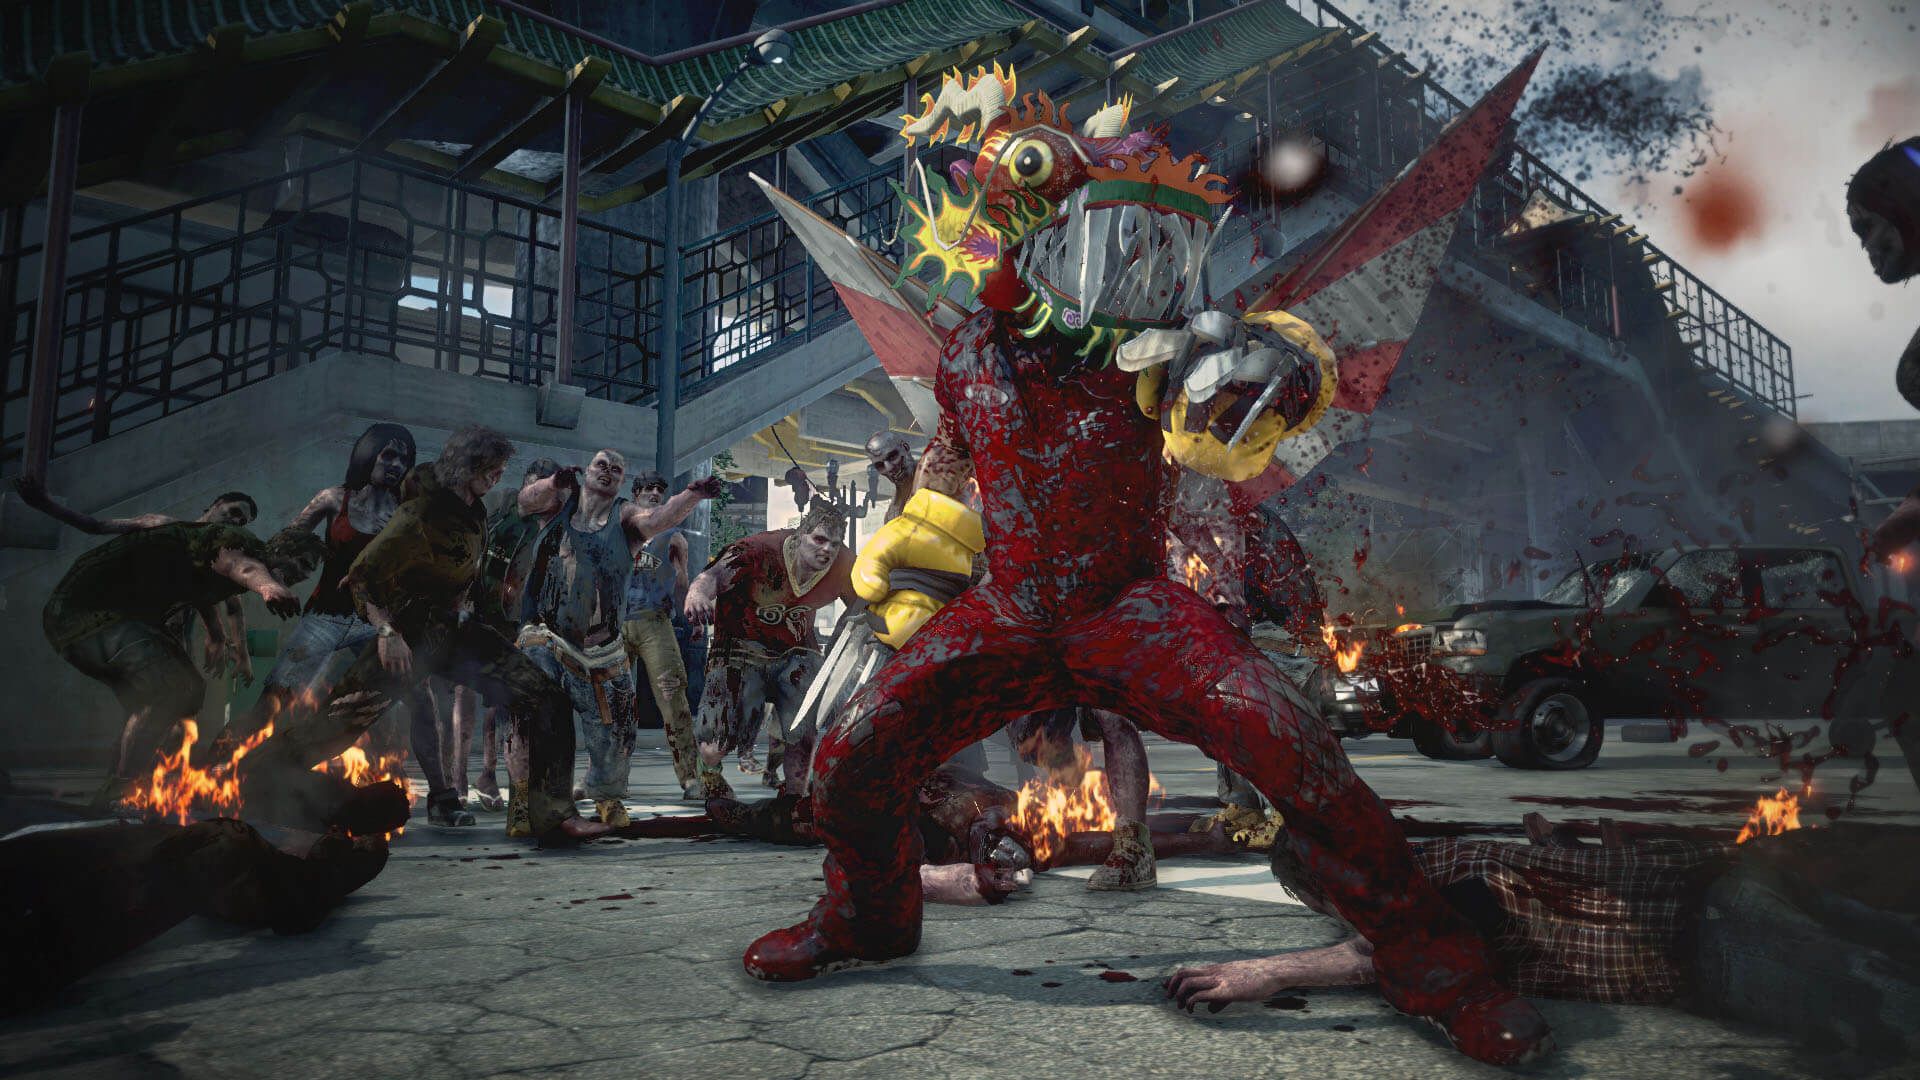 Dead Rising 3 a screenshot of a player in the mecha dragon outfit in front of zombies